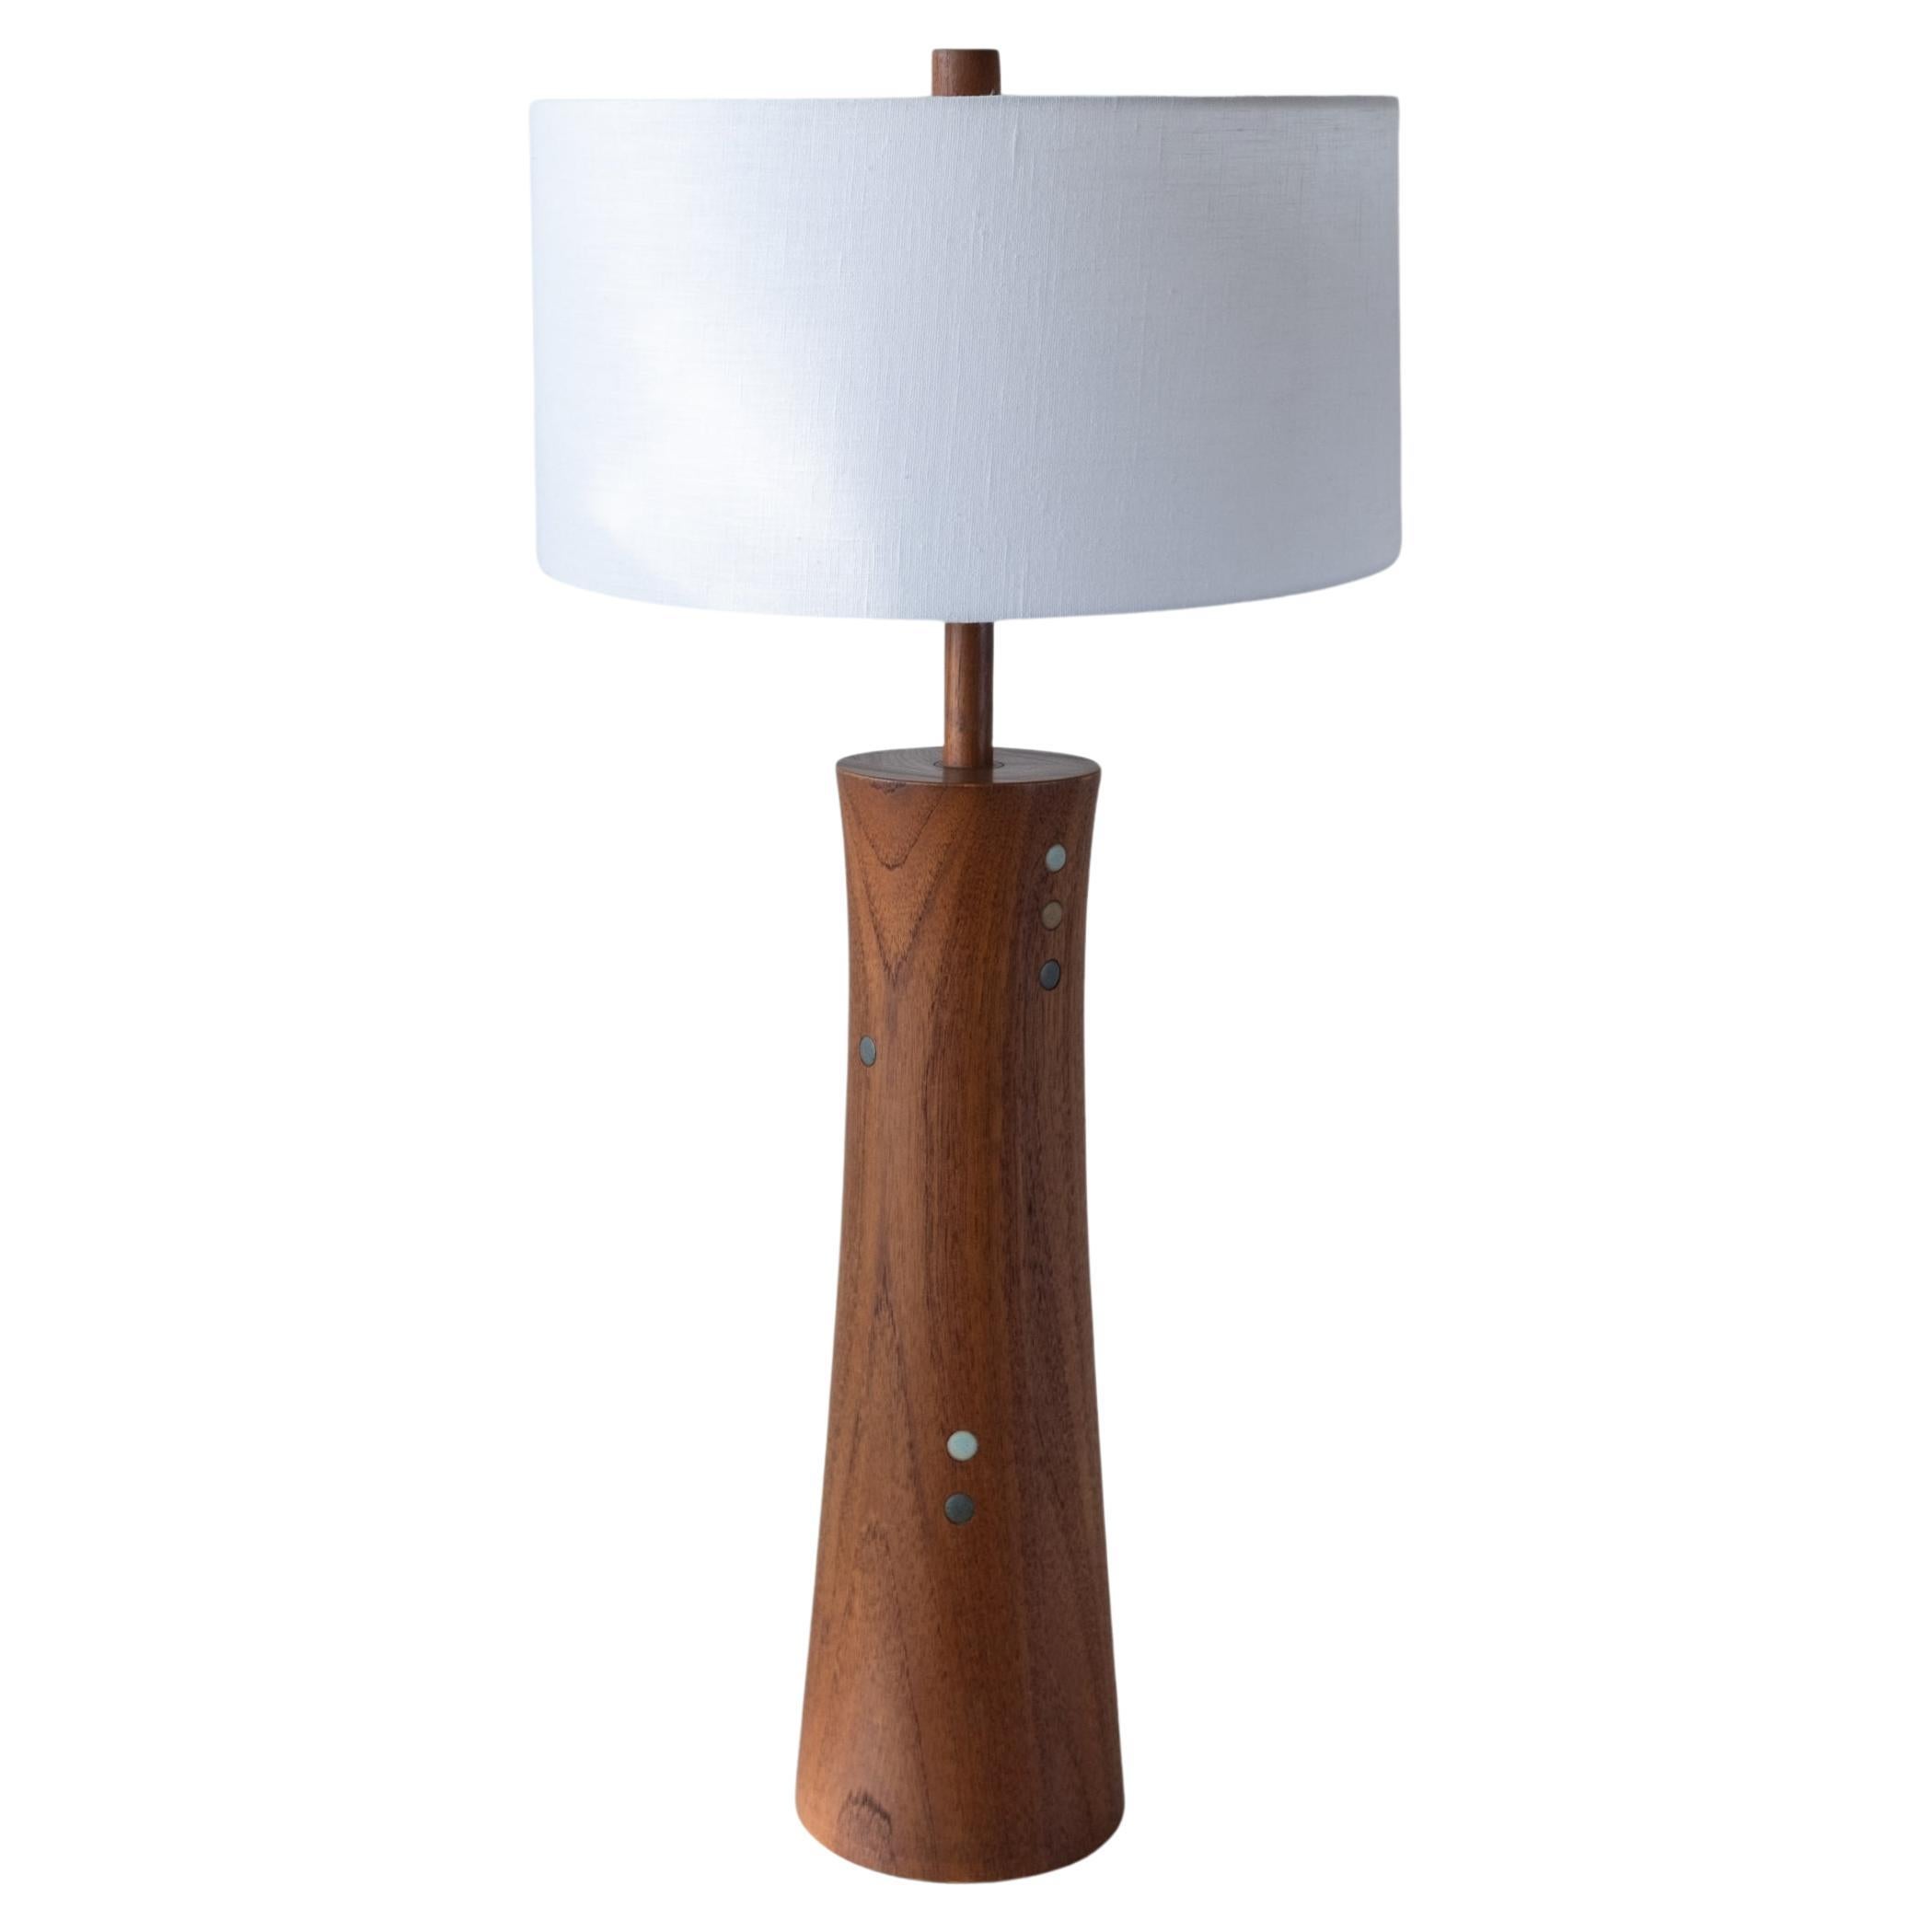 Jane and Gordon Martz Ceramic and Walnut Table Lamp For Sale